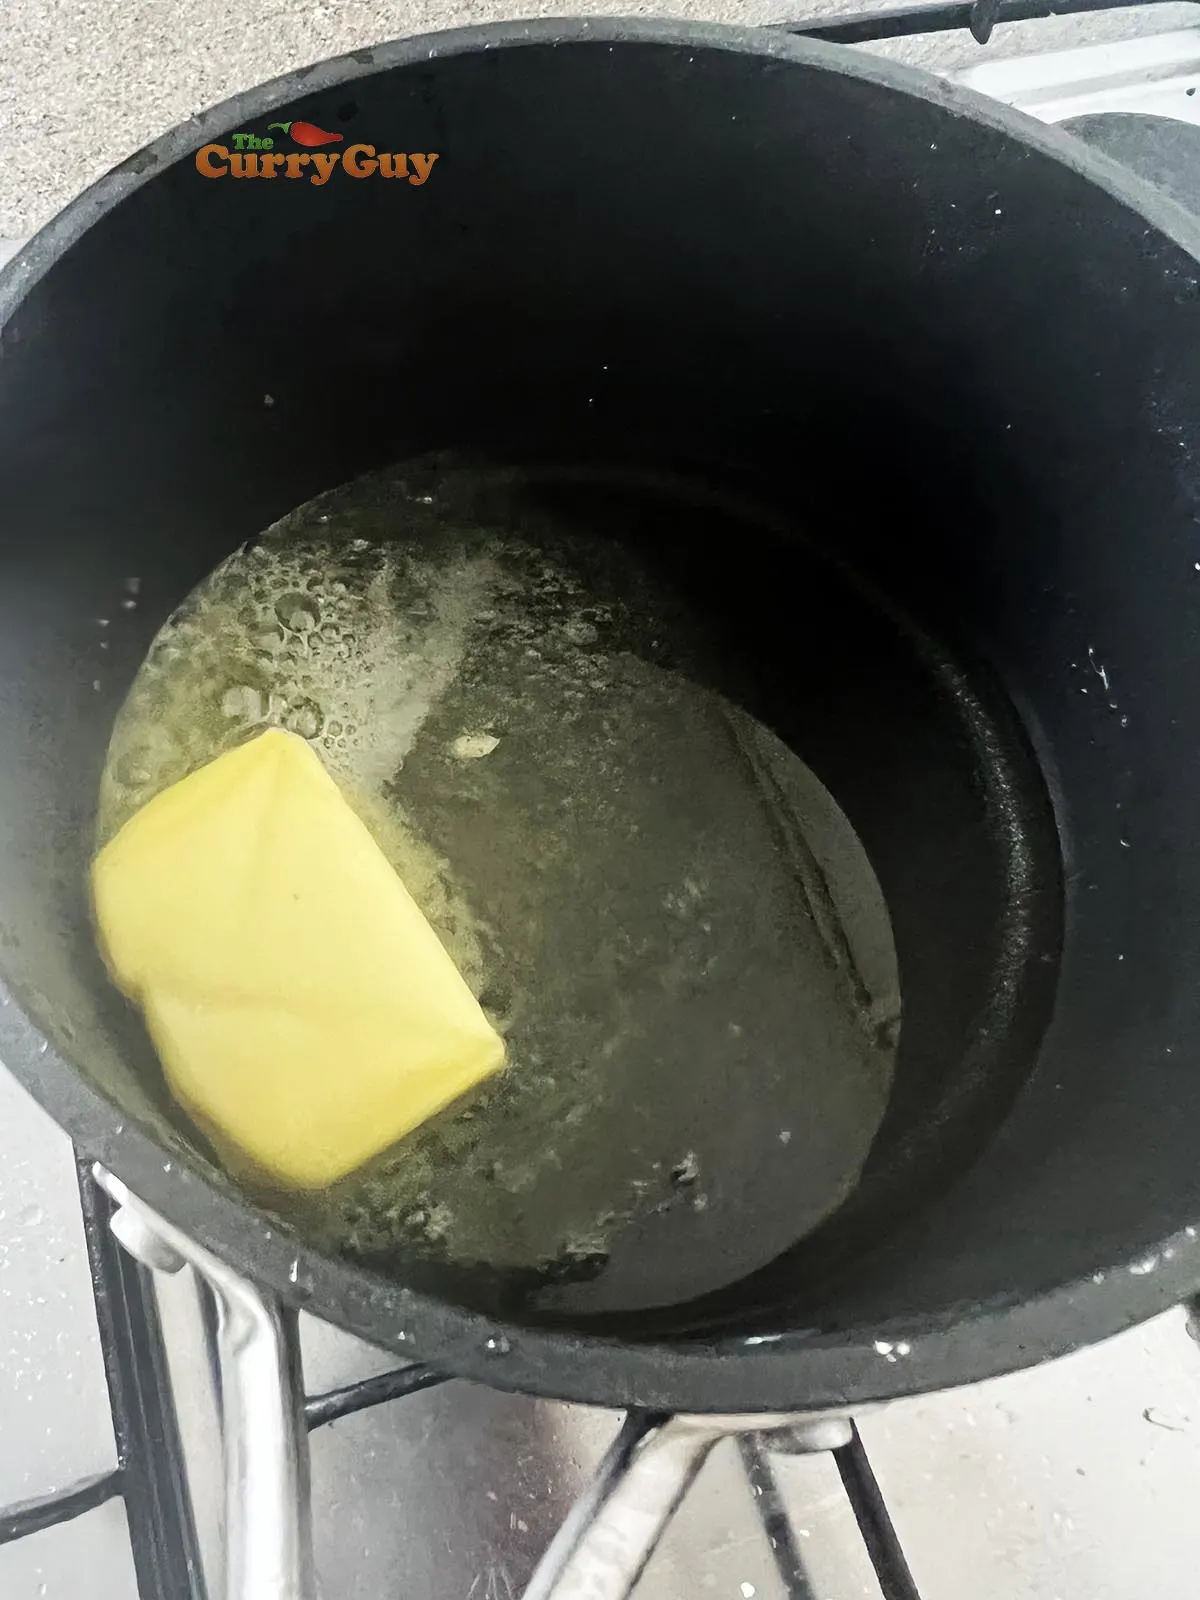 Melting butter into oil in the pan